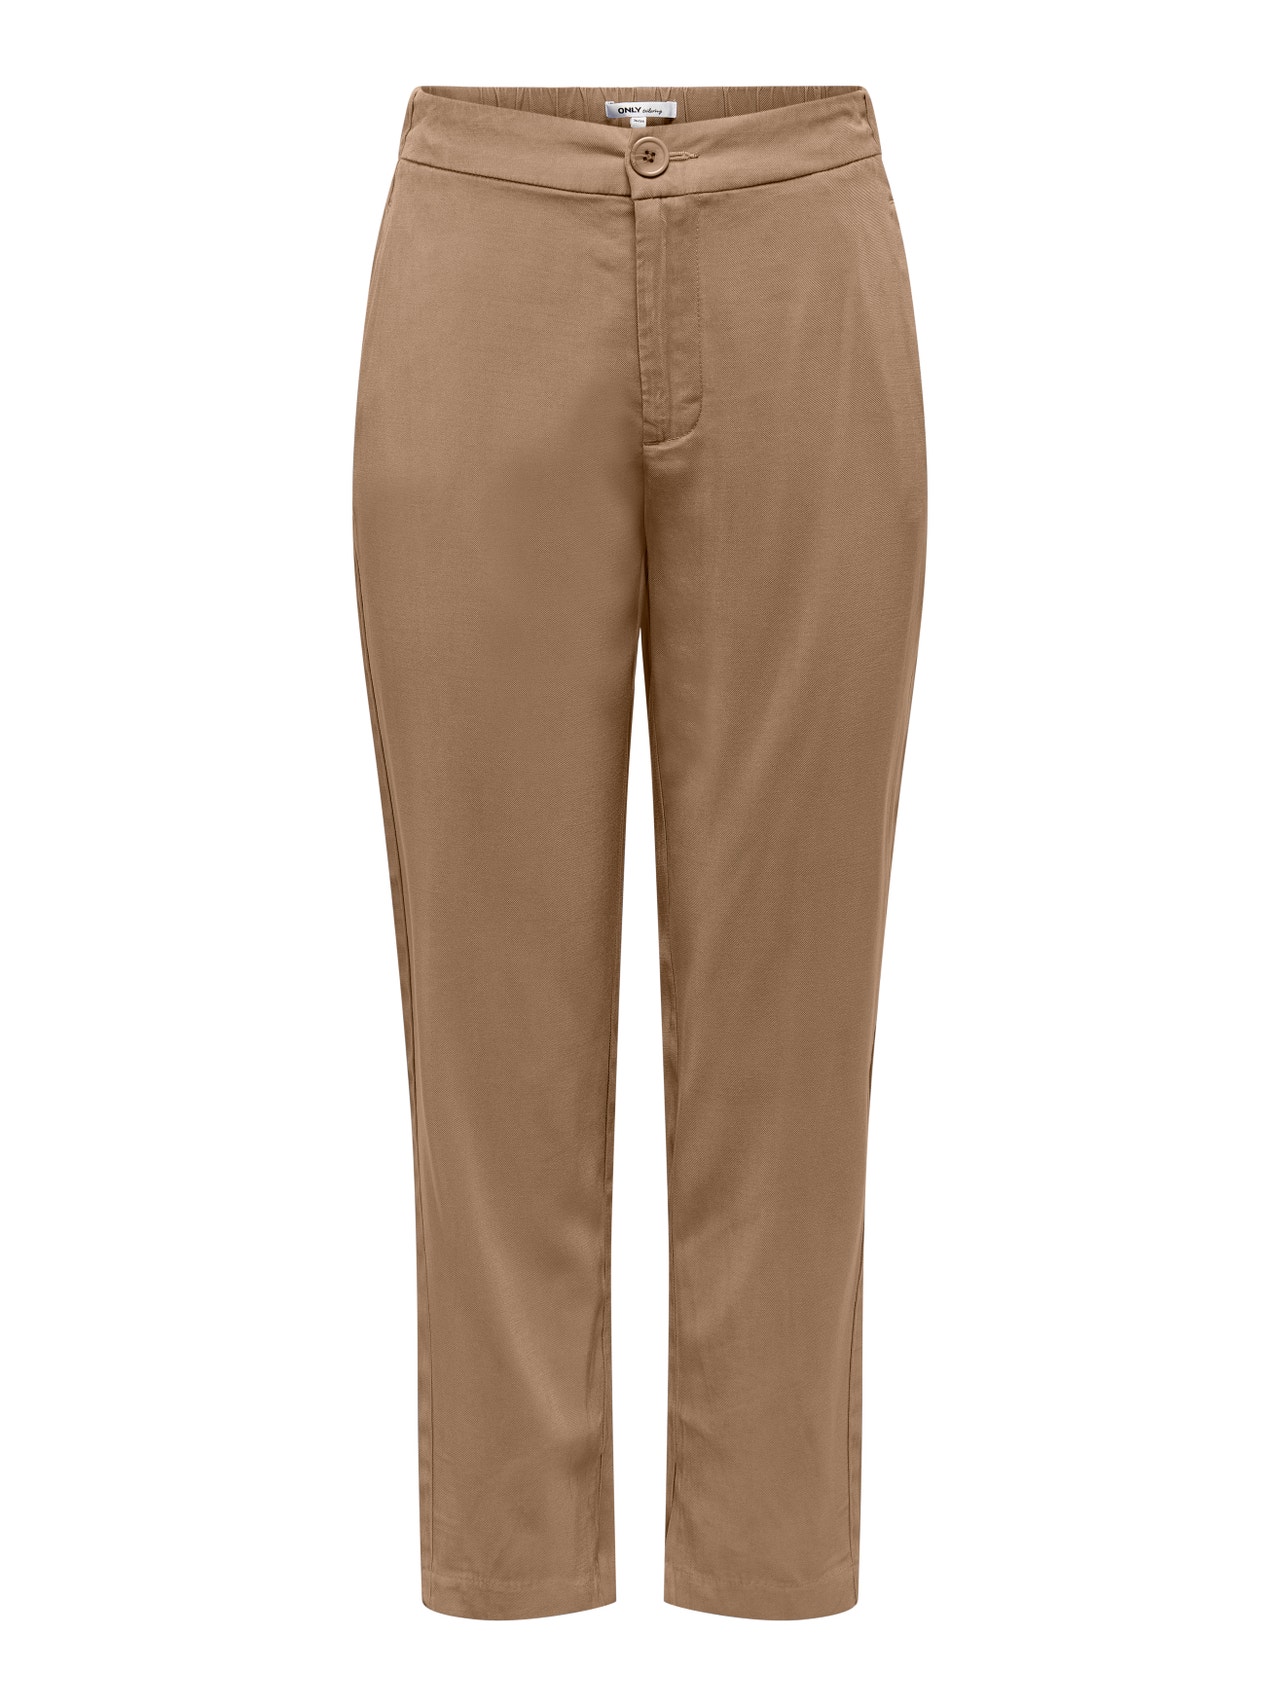 ONLY Highwaisted trousers -Burro - 15283605